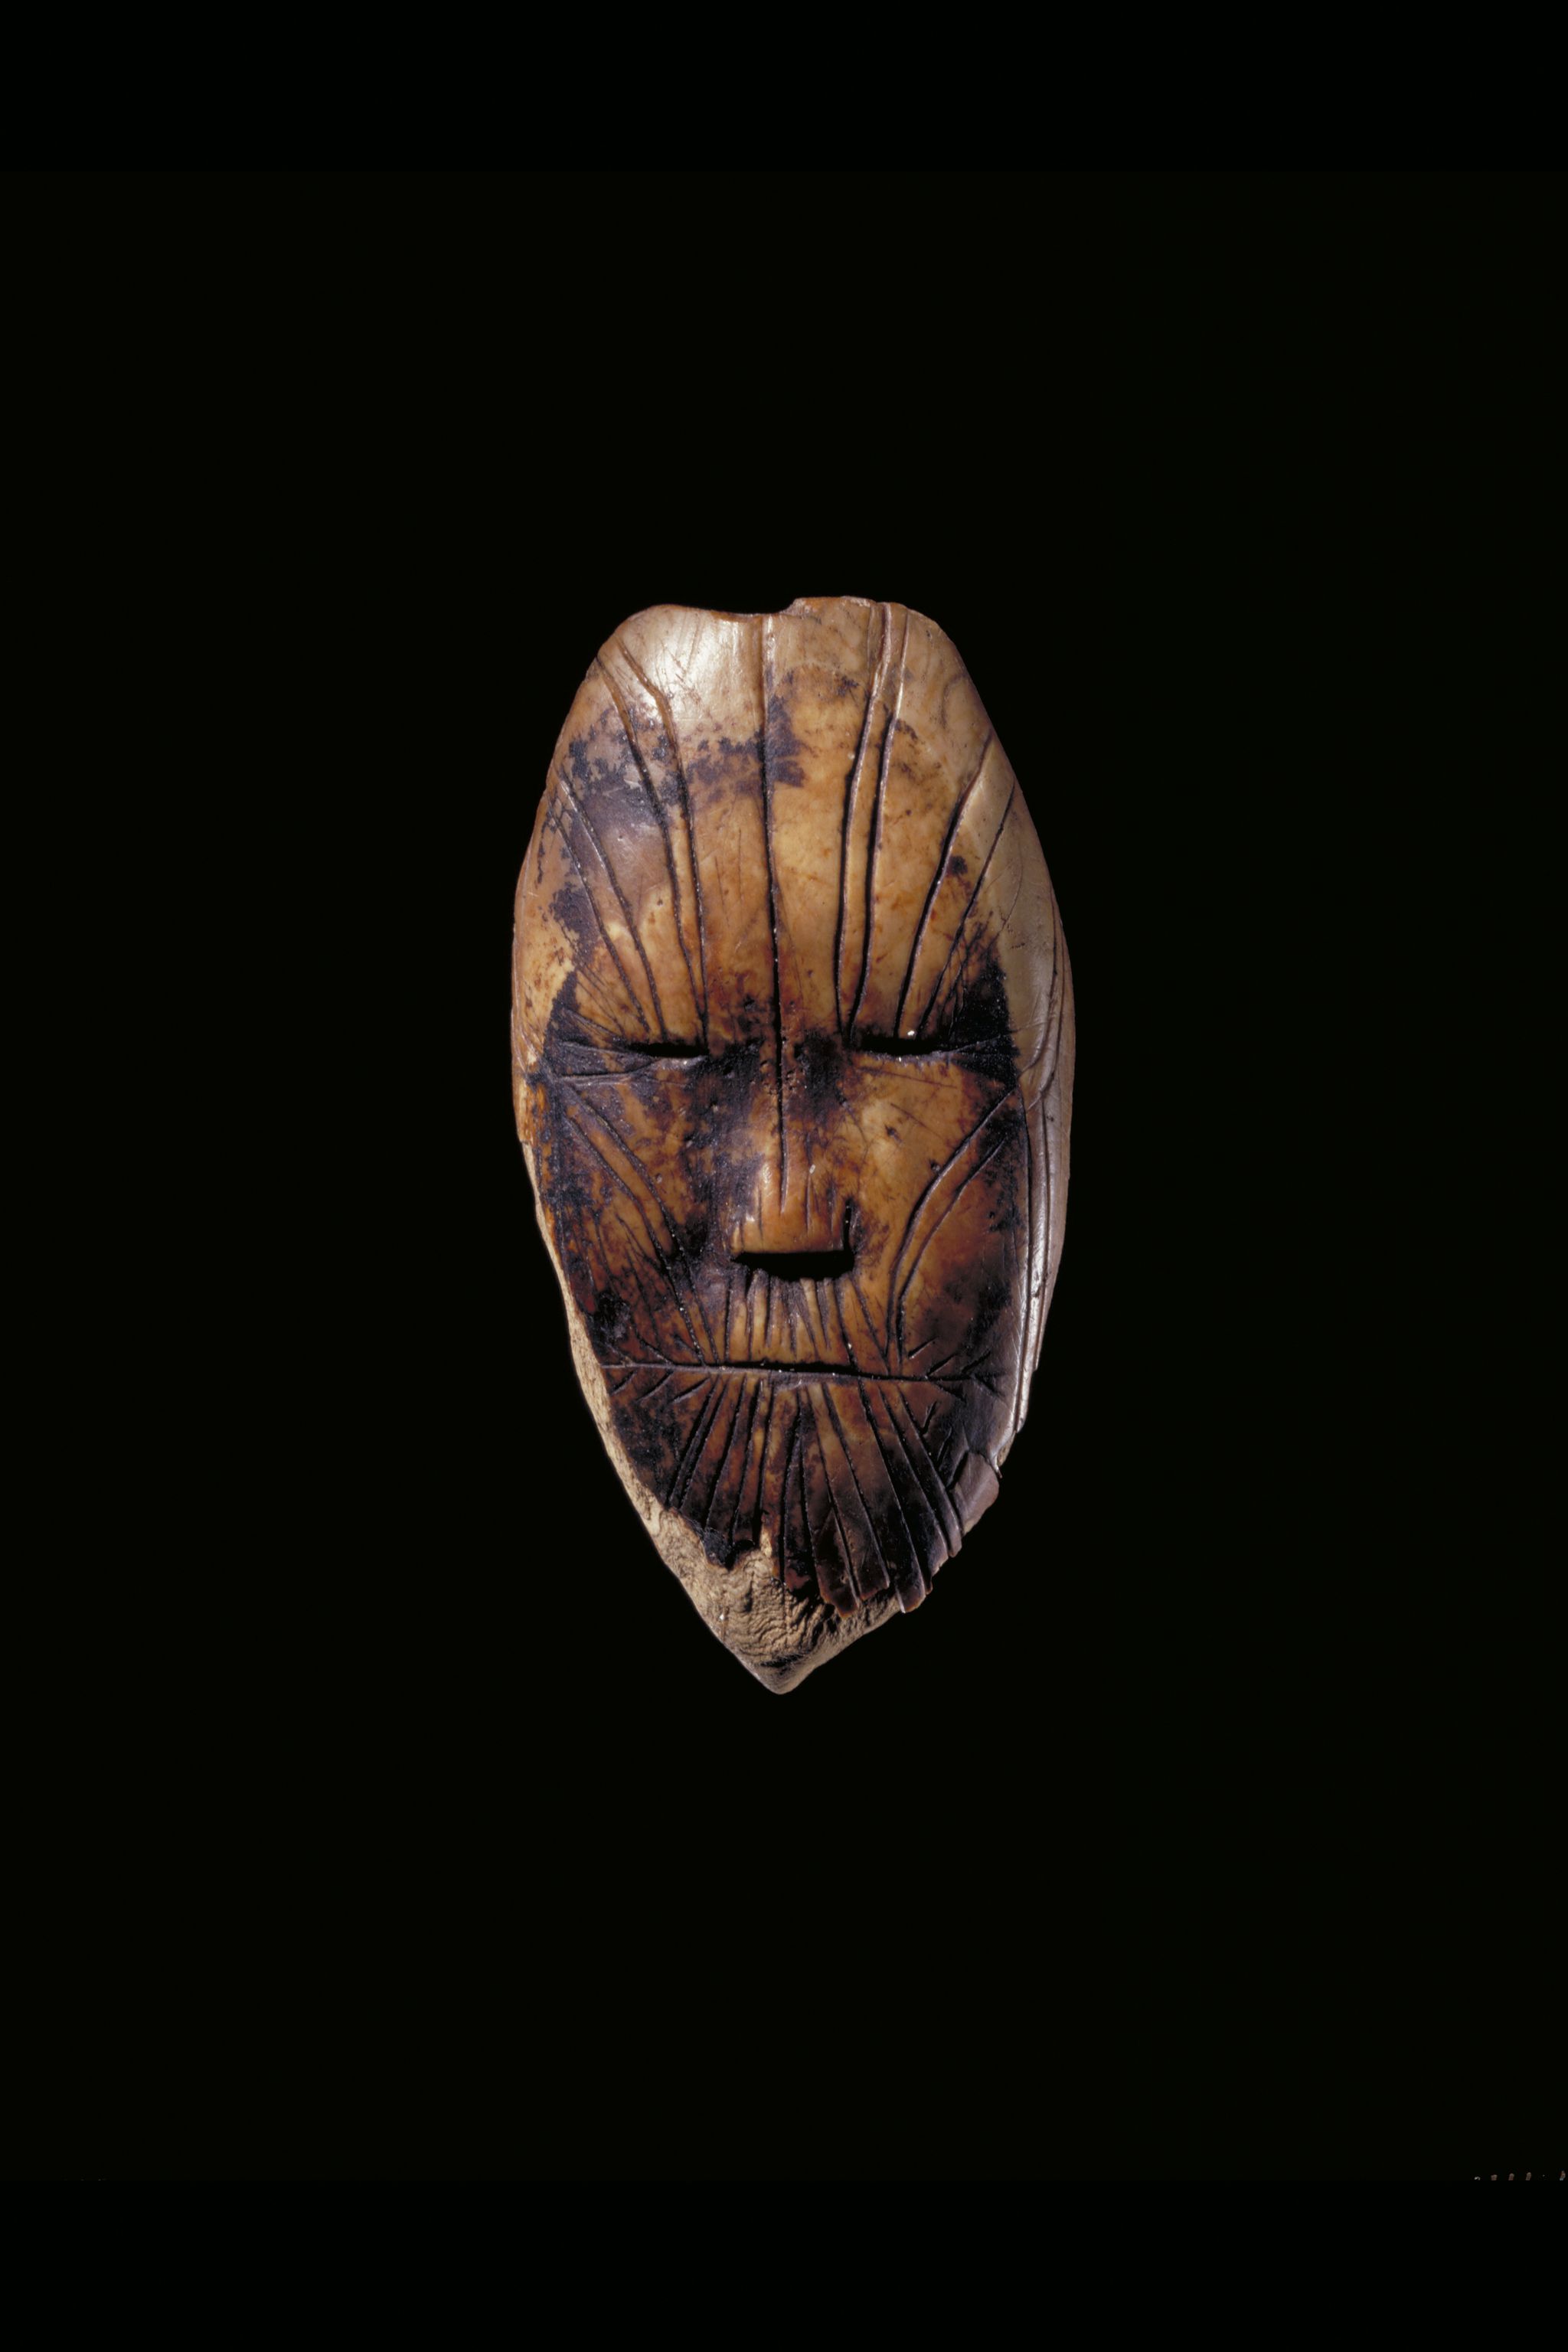 Small carving of a face with vertical lines running over it